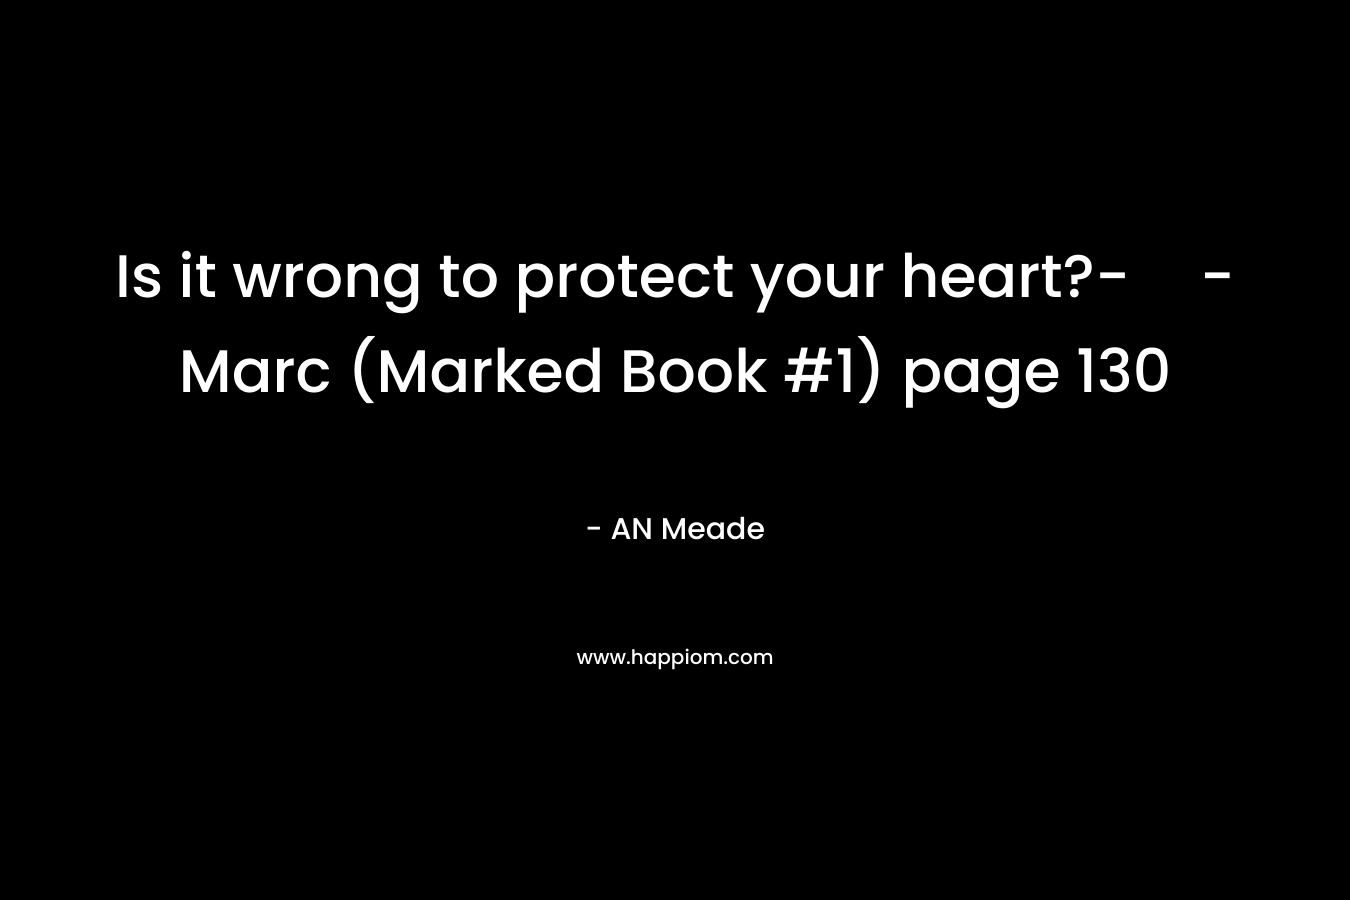 Is it wrong to protect your heart?-- Marc (Marked Book #1) page 130